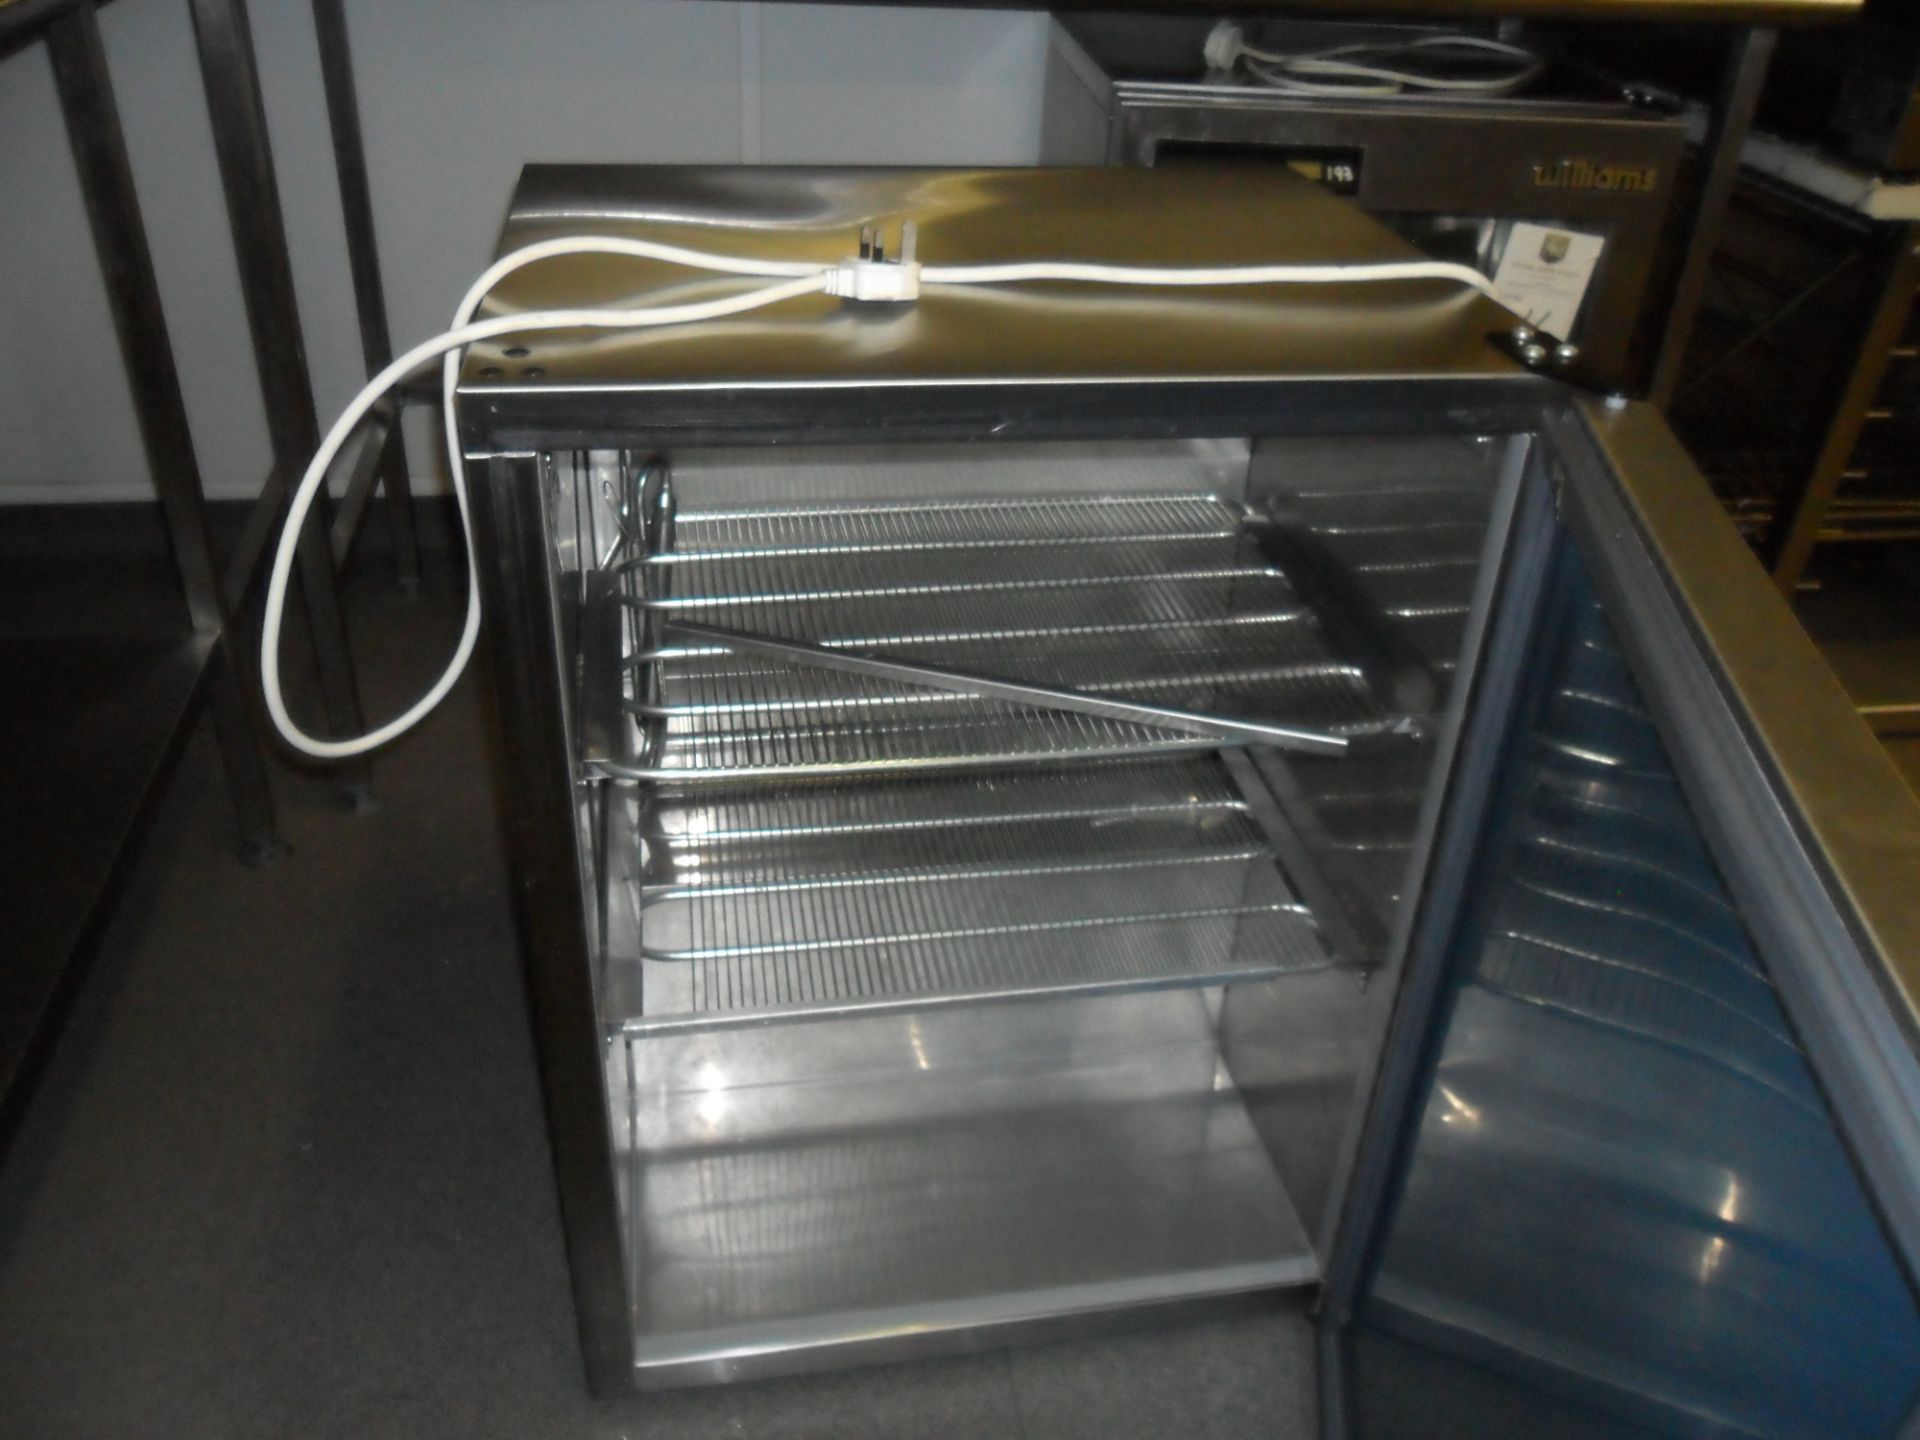 Williams under counter stainless steel freezer. Very clean still with plastic coated packing seal on - Image 3 of 3